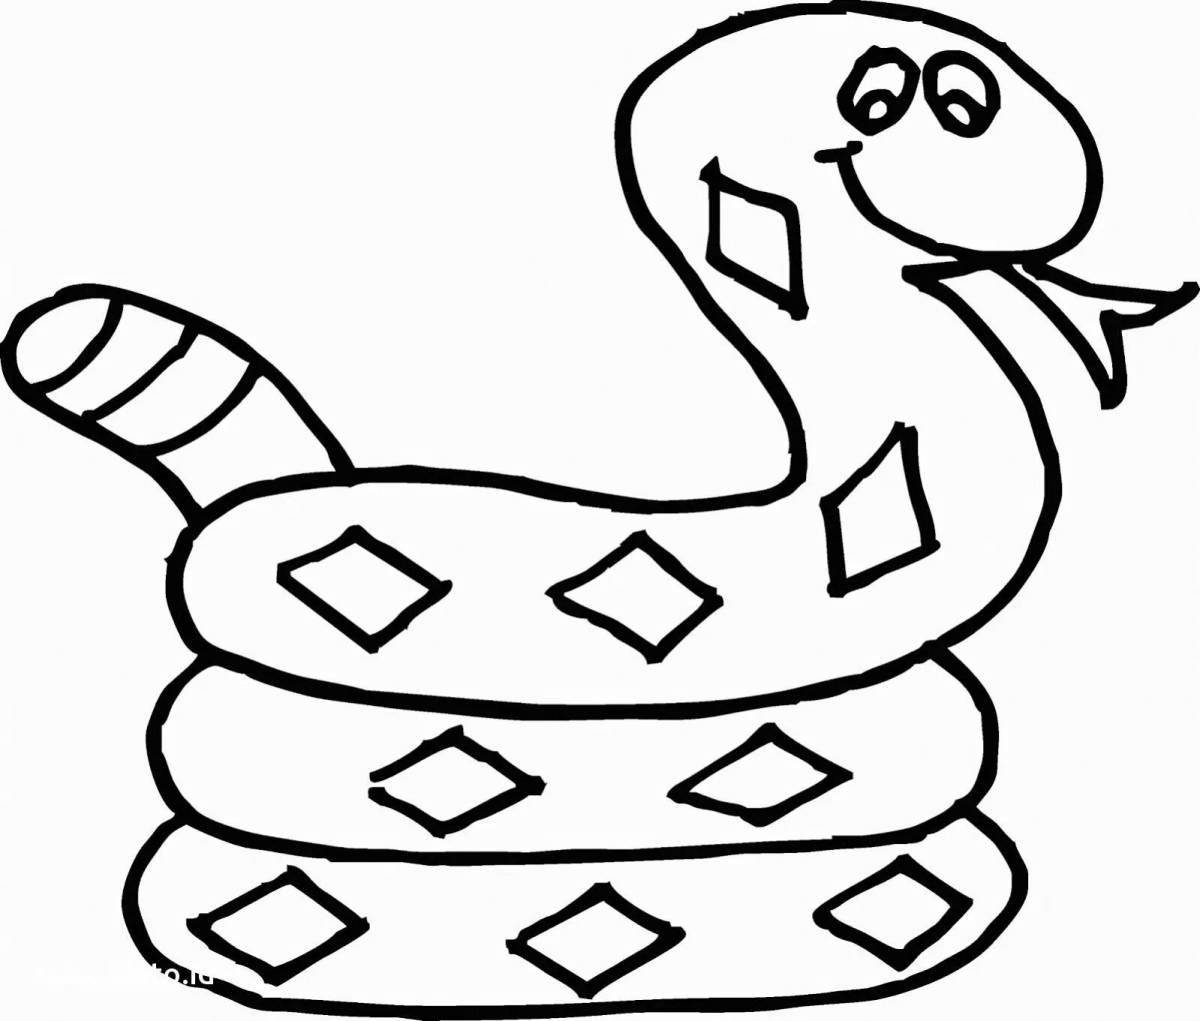 Cute snake coloring page for toddlers